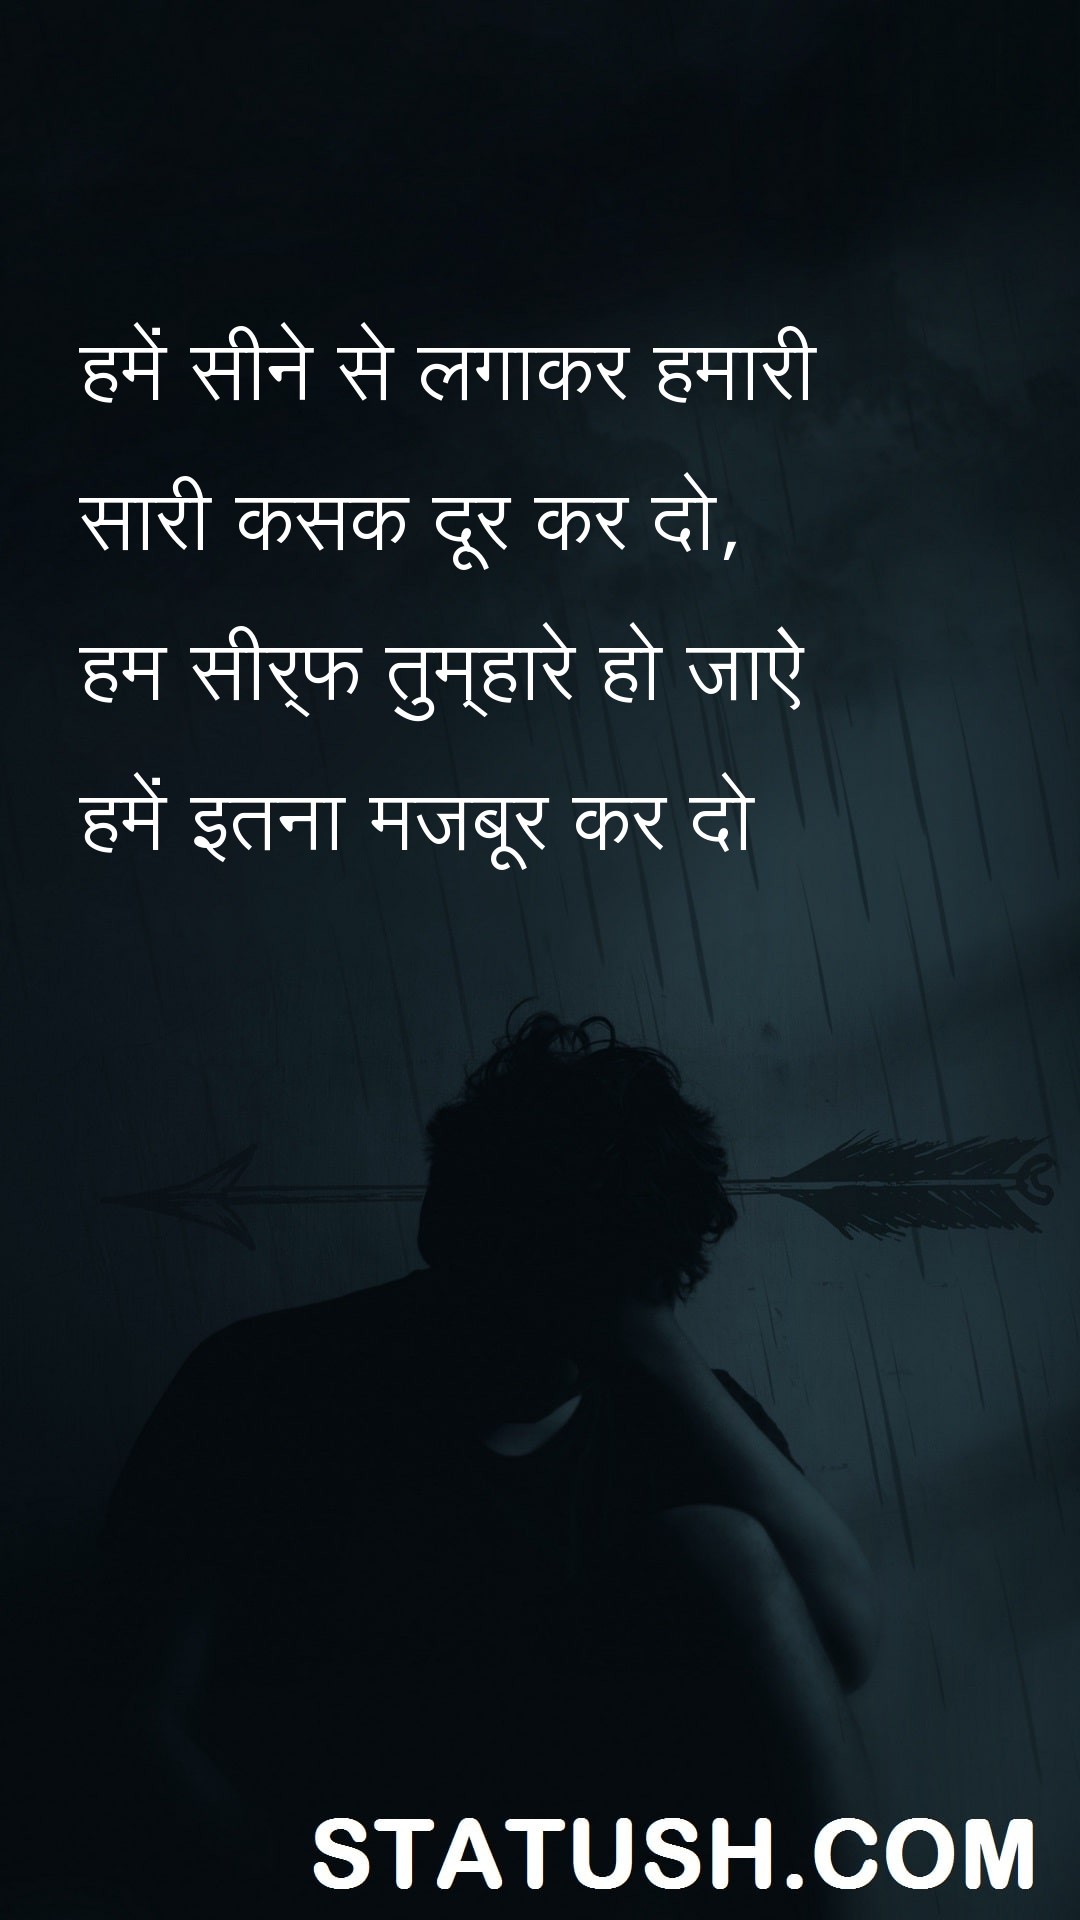 Remove all our tightness by attaching - Shayri Quotes at statush.com